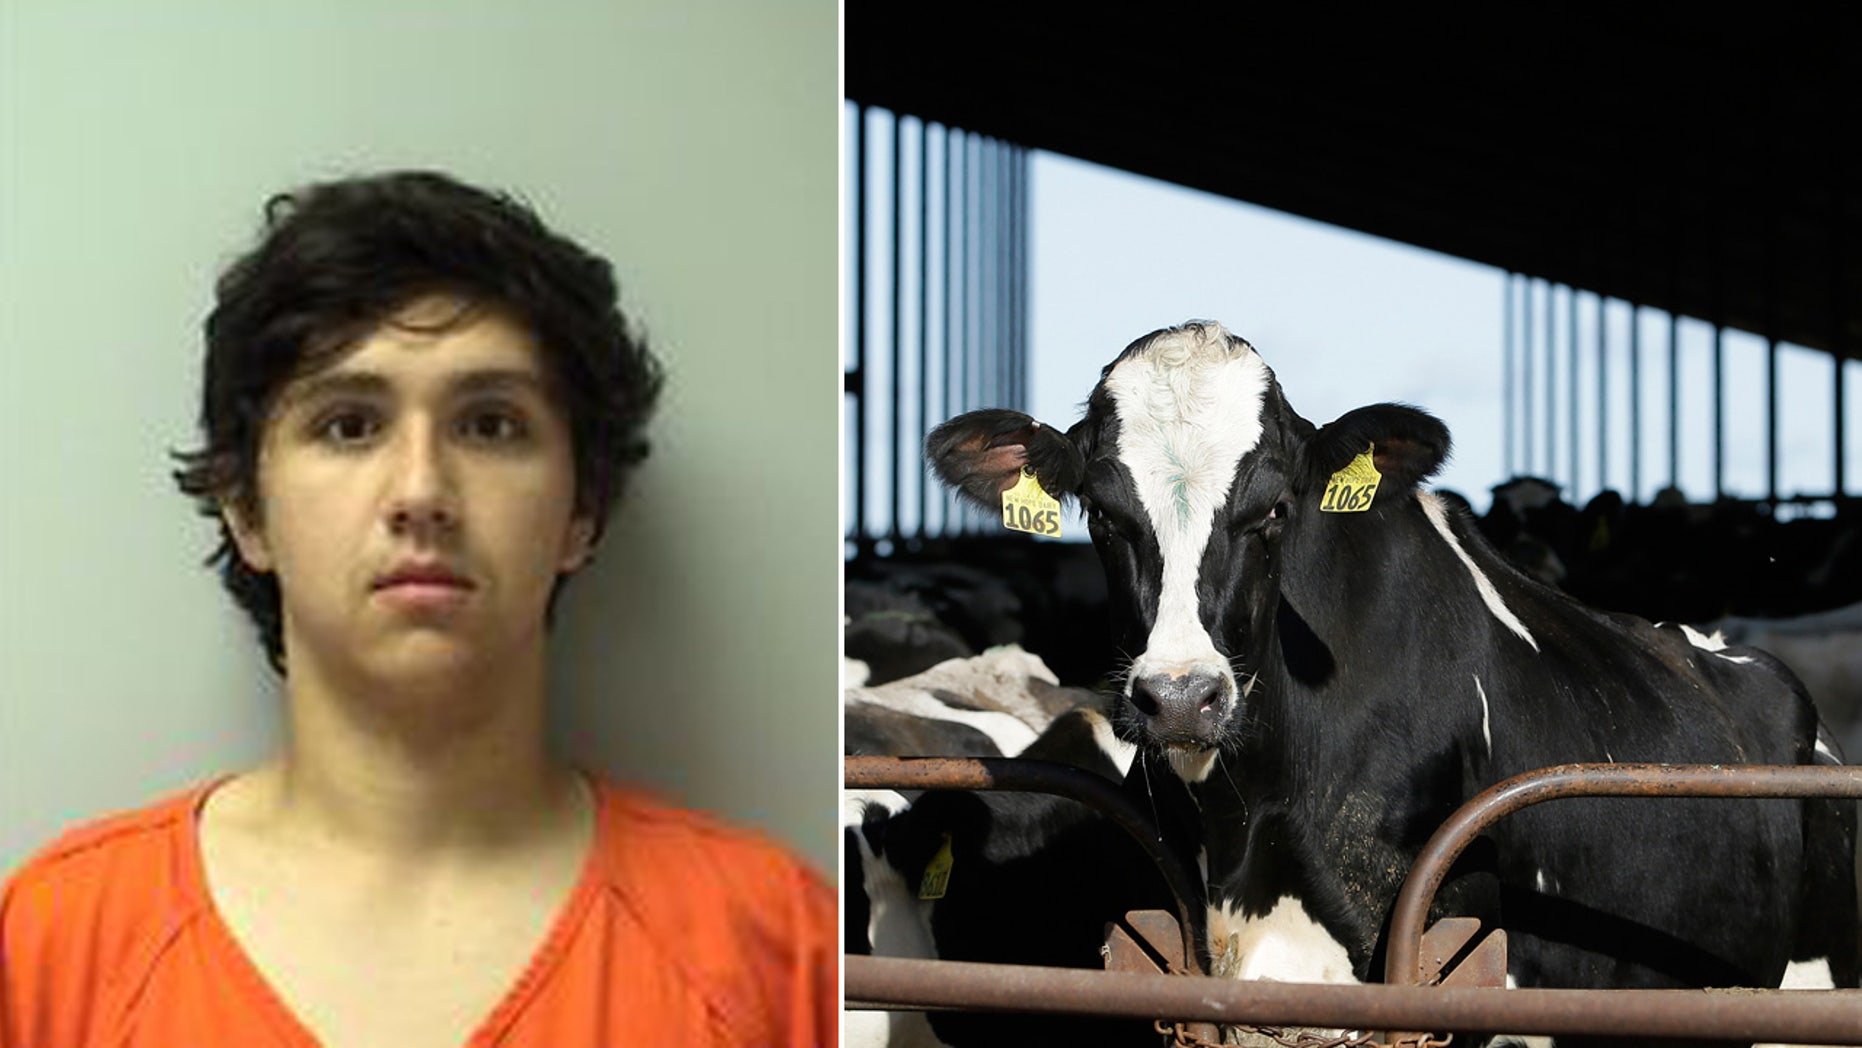 Joshua Litza, 19, was arrested on Friday and charged with two counts of intentional animal feed and four counts of missing a carcass, after the authorities said they neglected the procedure. her father's cattle.